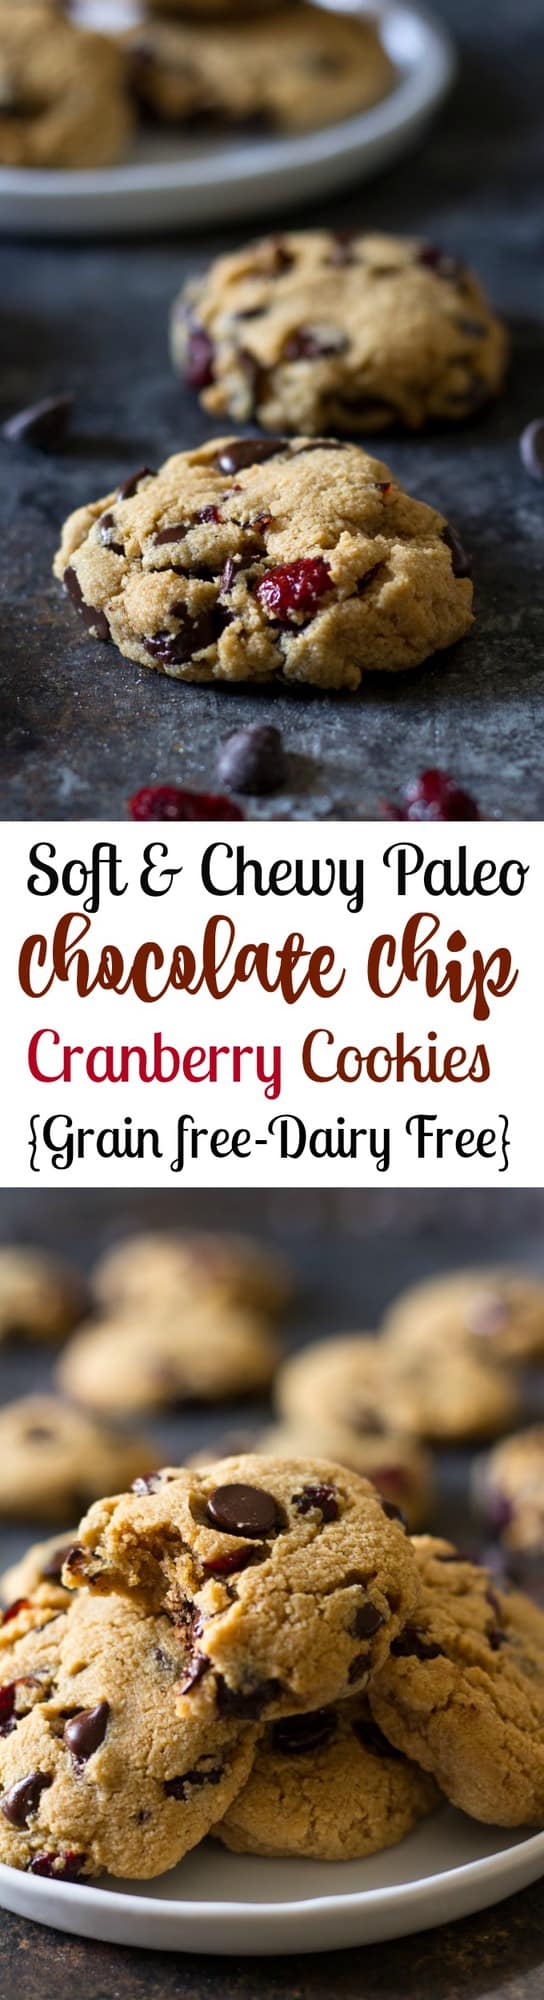 Soft and chewy paleo chocolate chip cranberry cookies that you won't believe are healthy! Grain free, dairy free, Paleo and very easy to make